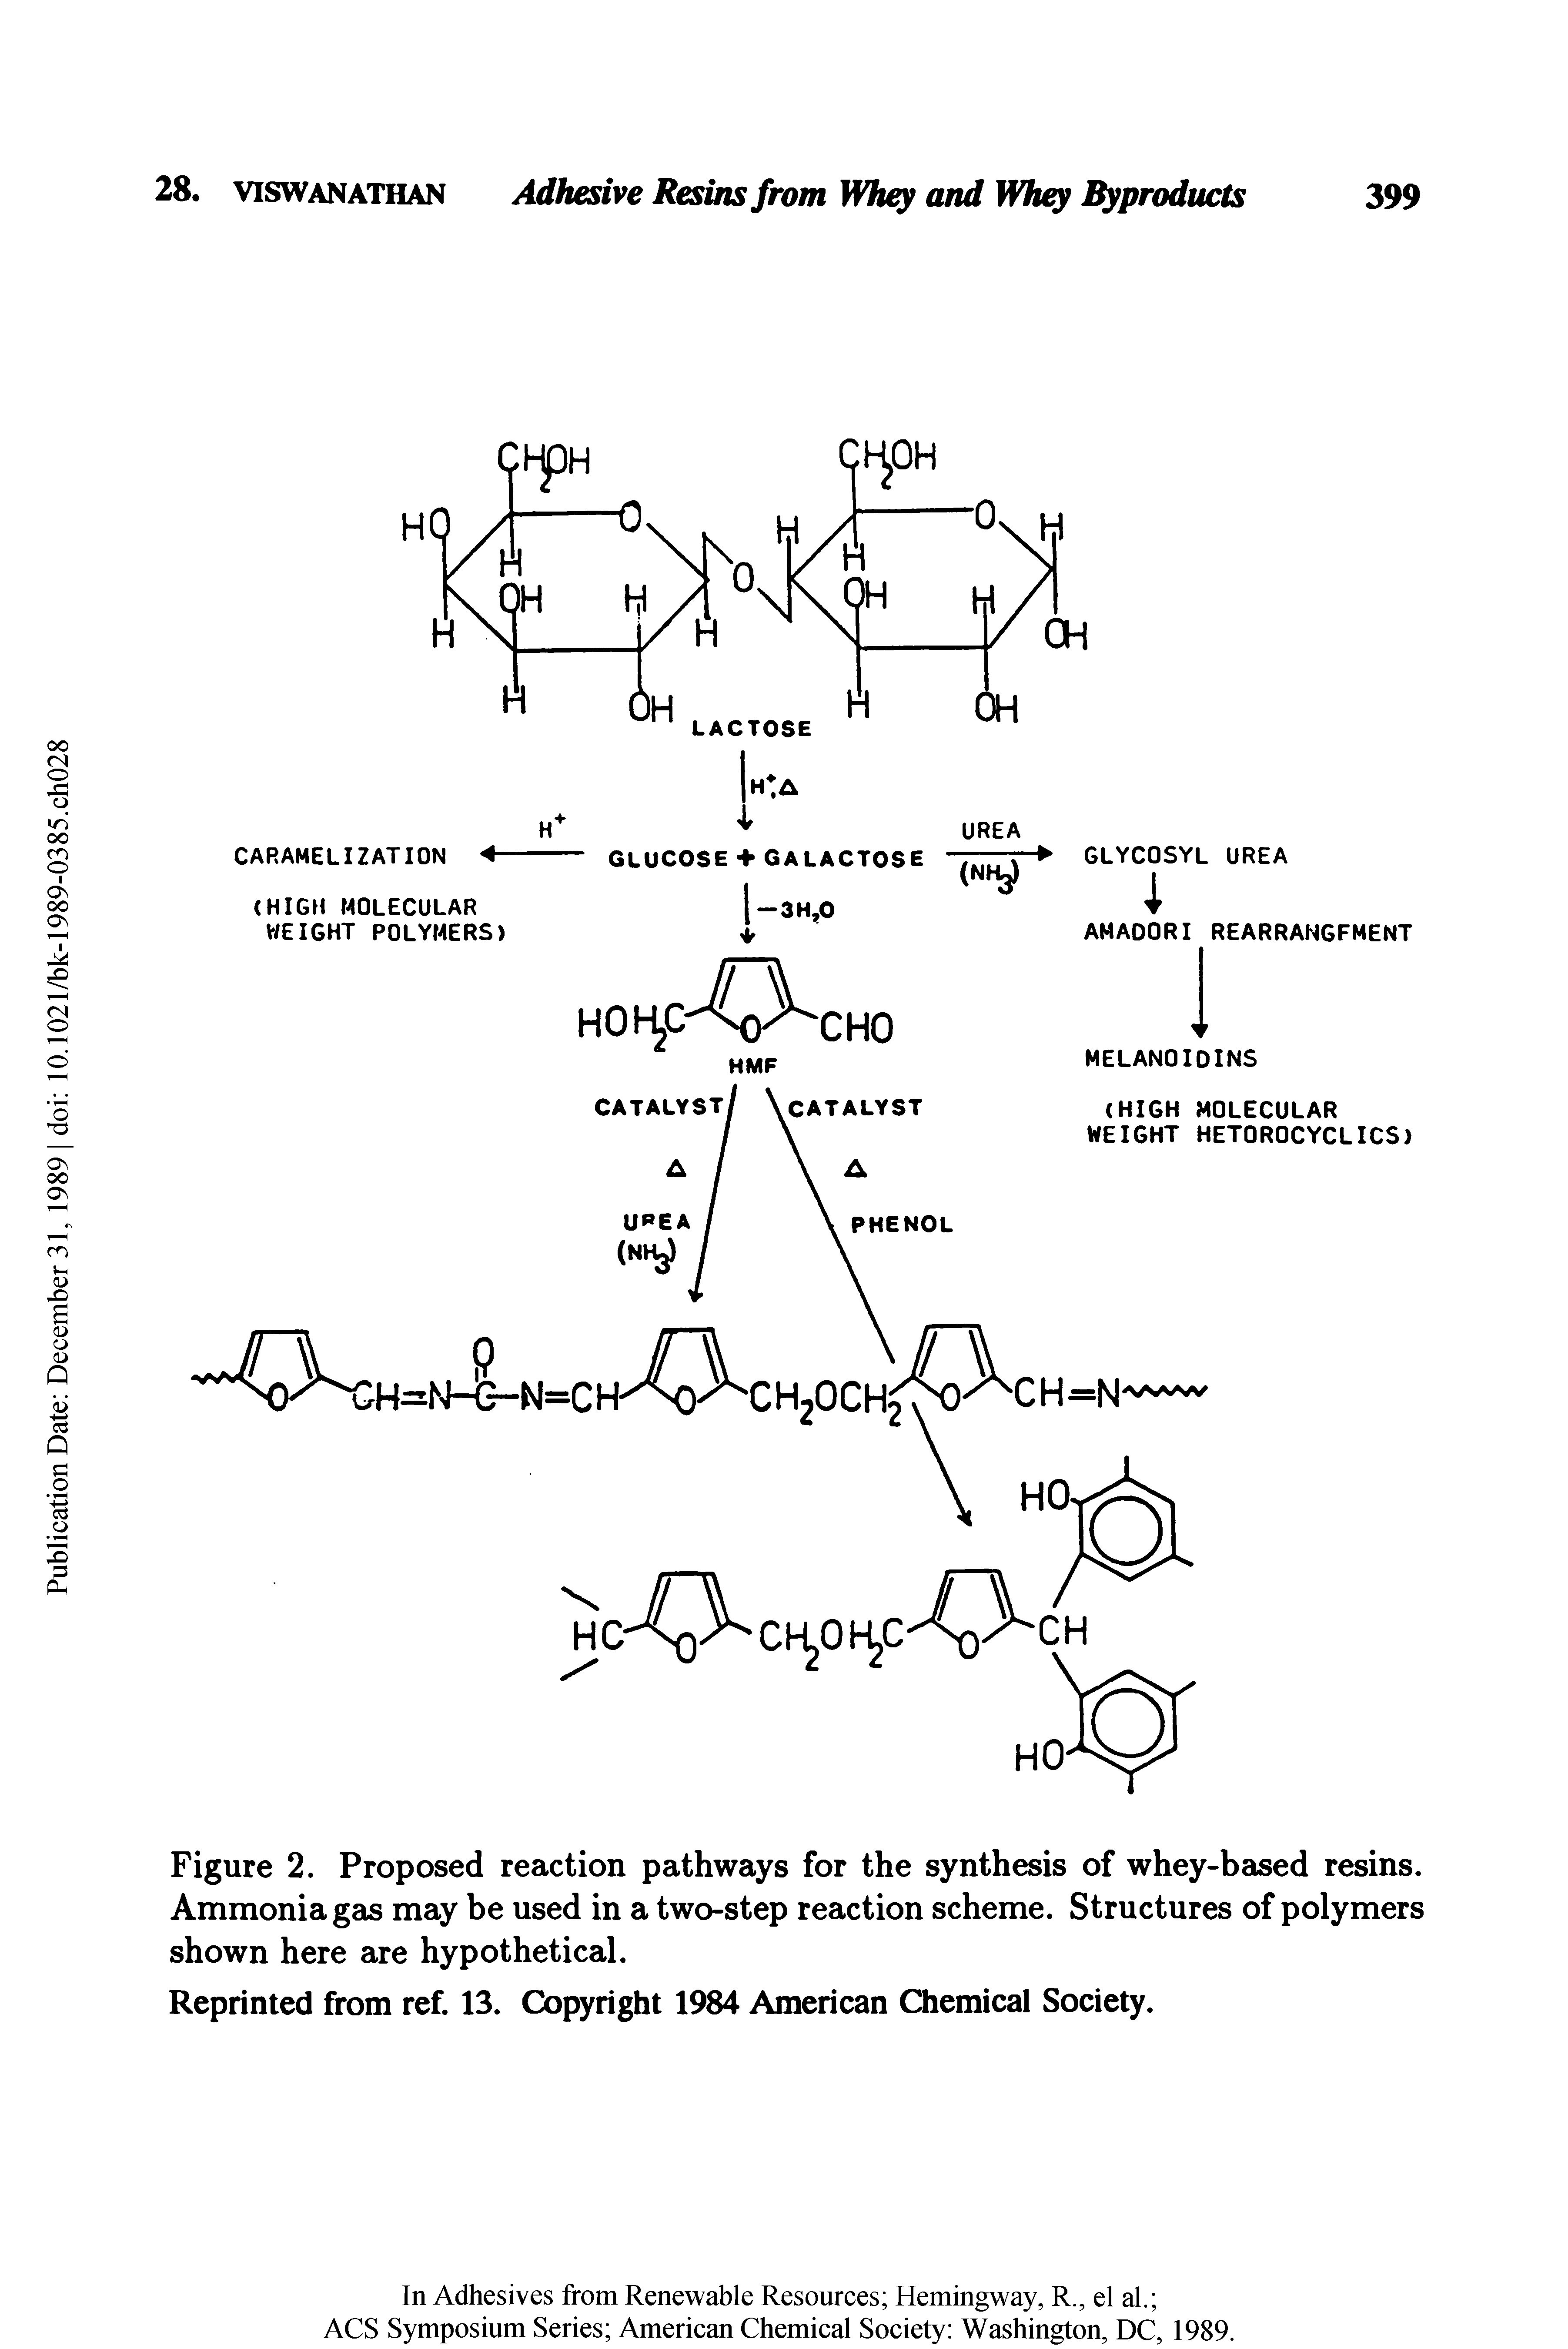 Figure 2. Proposed reaction pathways for the synthesis of whey-based resins. Ammonia gas may be used in a two-step reaction scheme. Structures of polymers shown here are hypothetical.